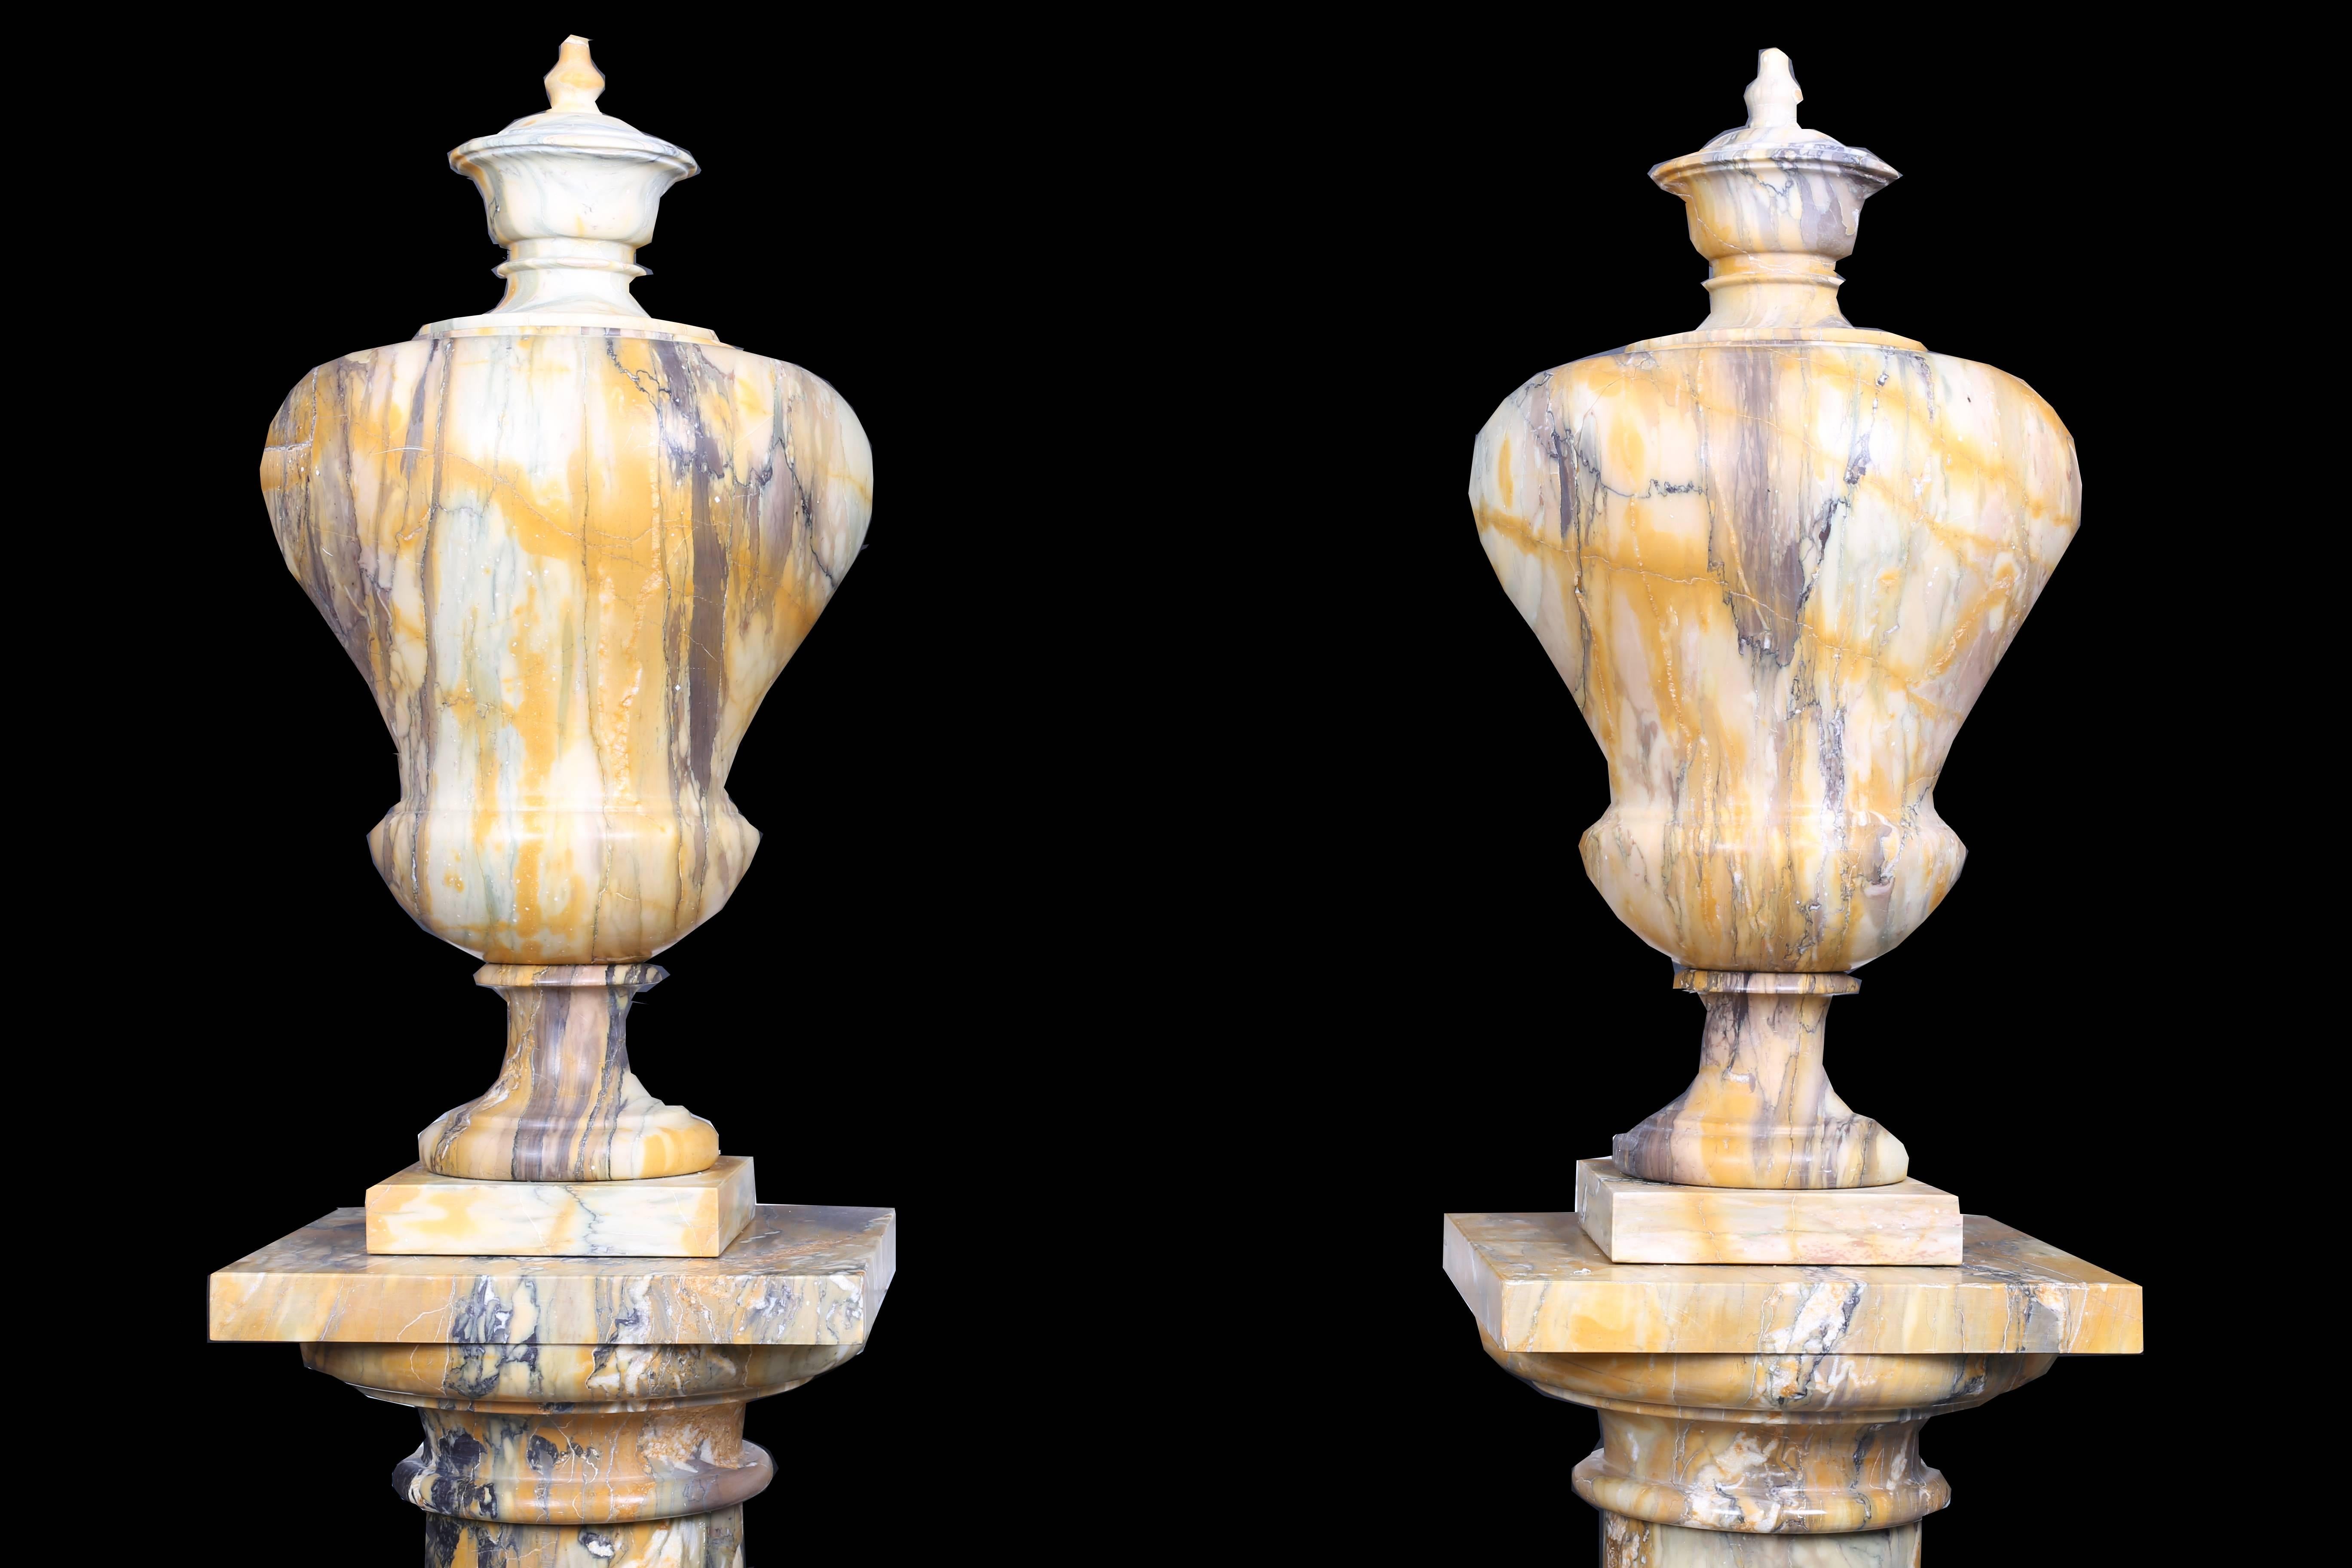 Neoclassical Revival Pair of Vintage Grand Marble Urns on Column Plinths in the Neoclassical Style For Sale